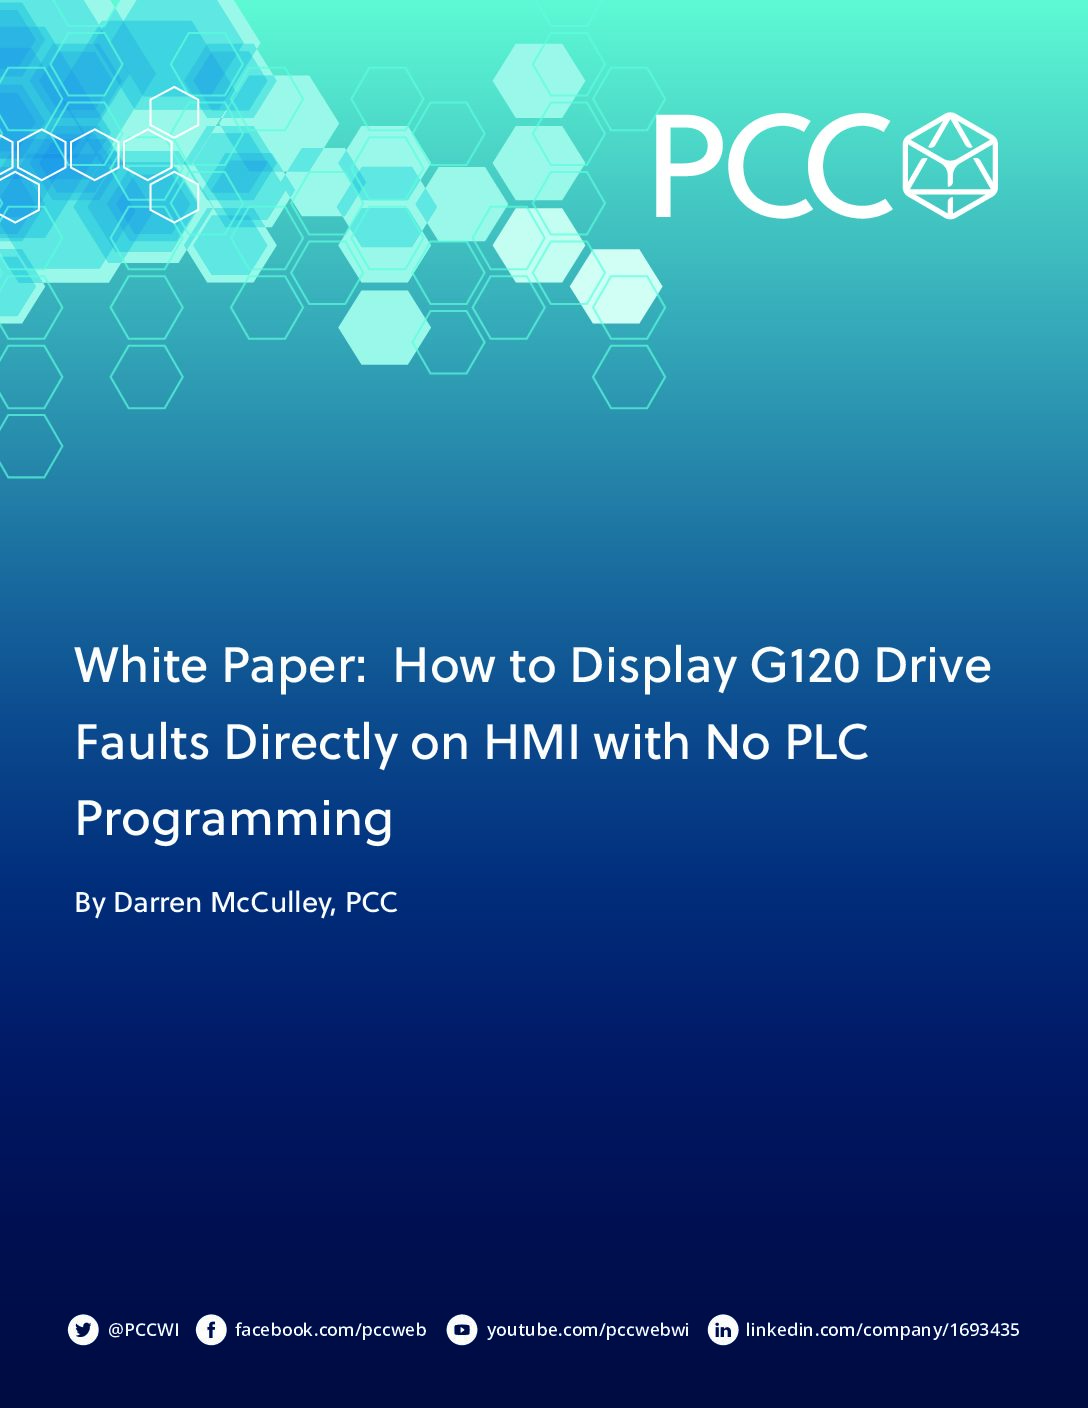 White Paper: How to Display G120 Drive Faults Directly on HMI with No PLC Programming